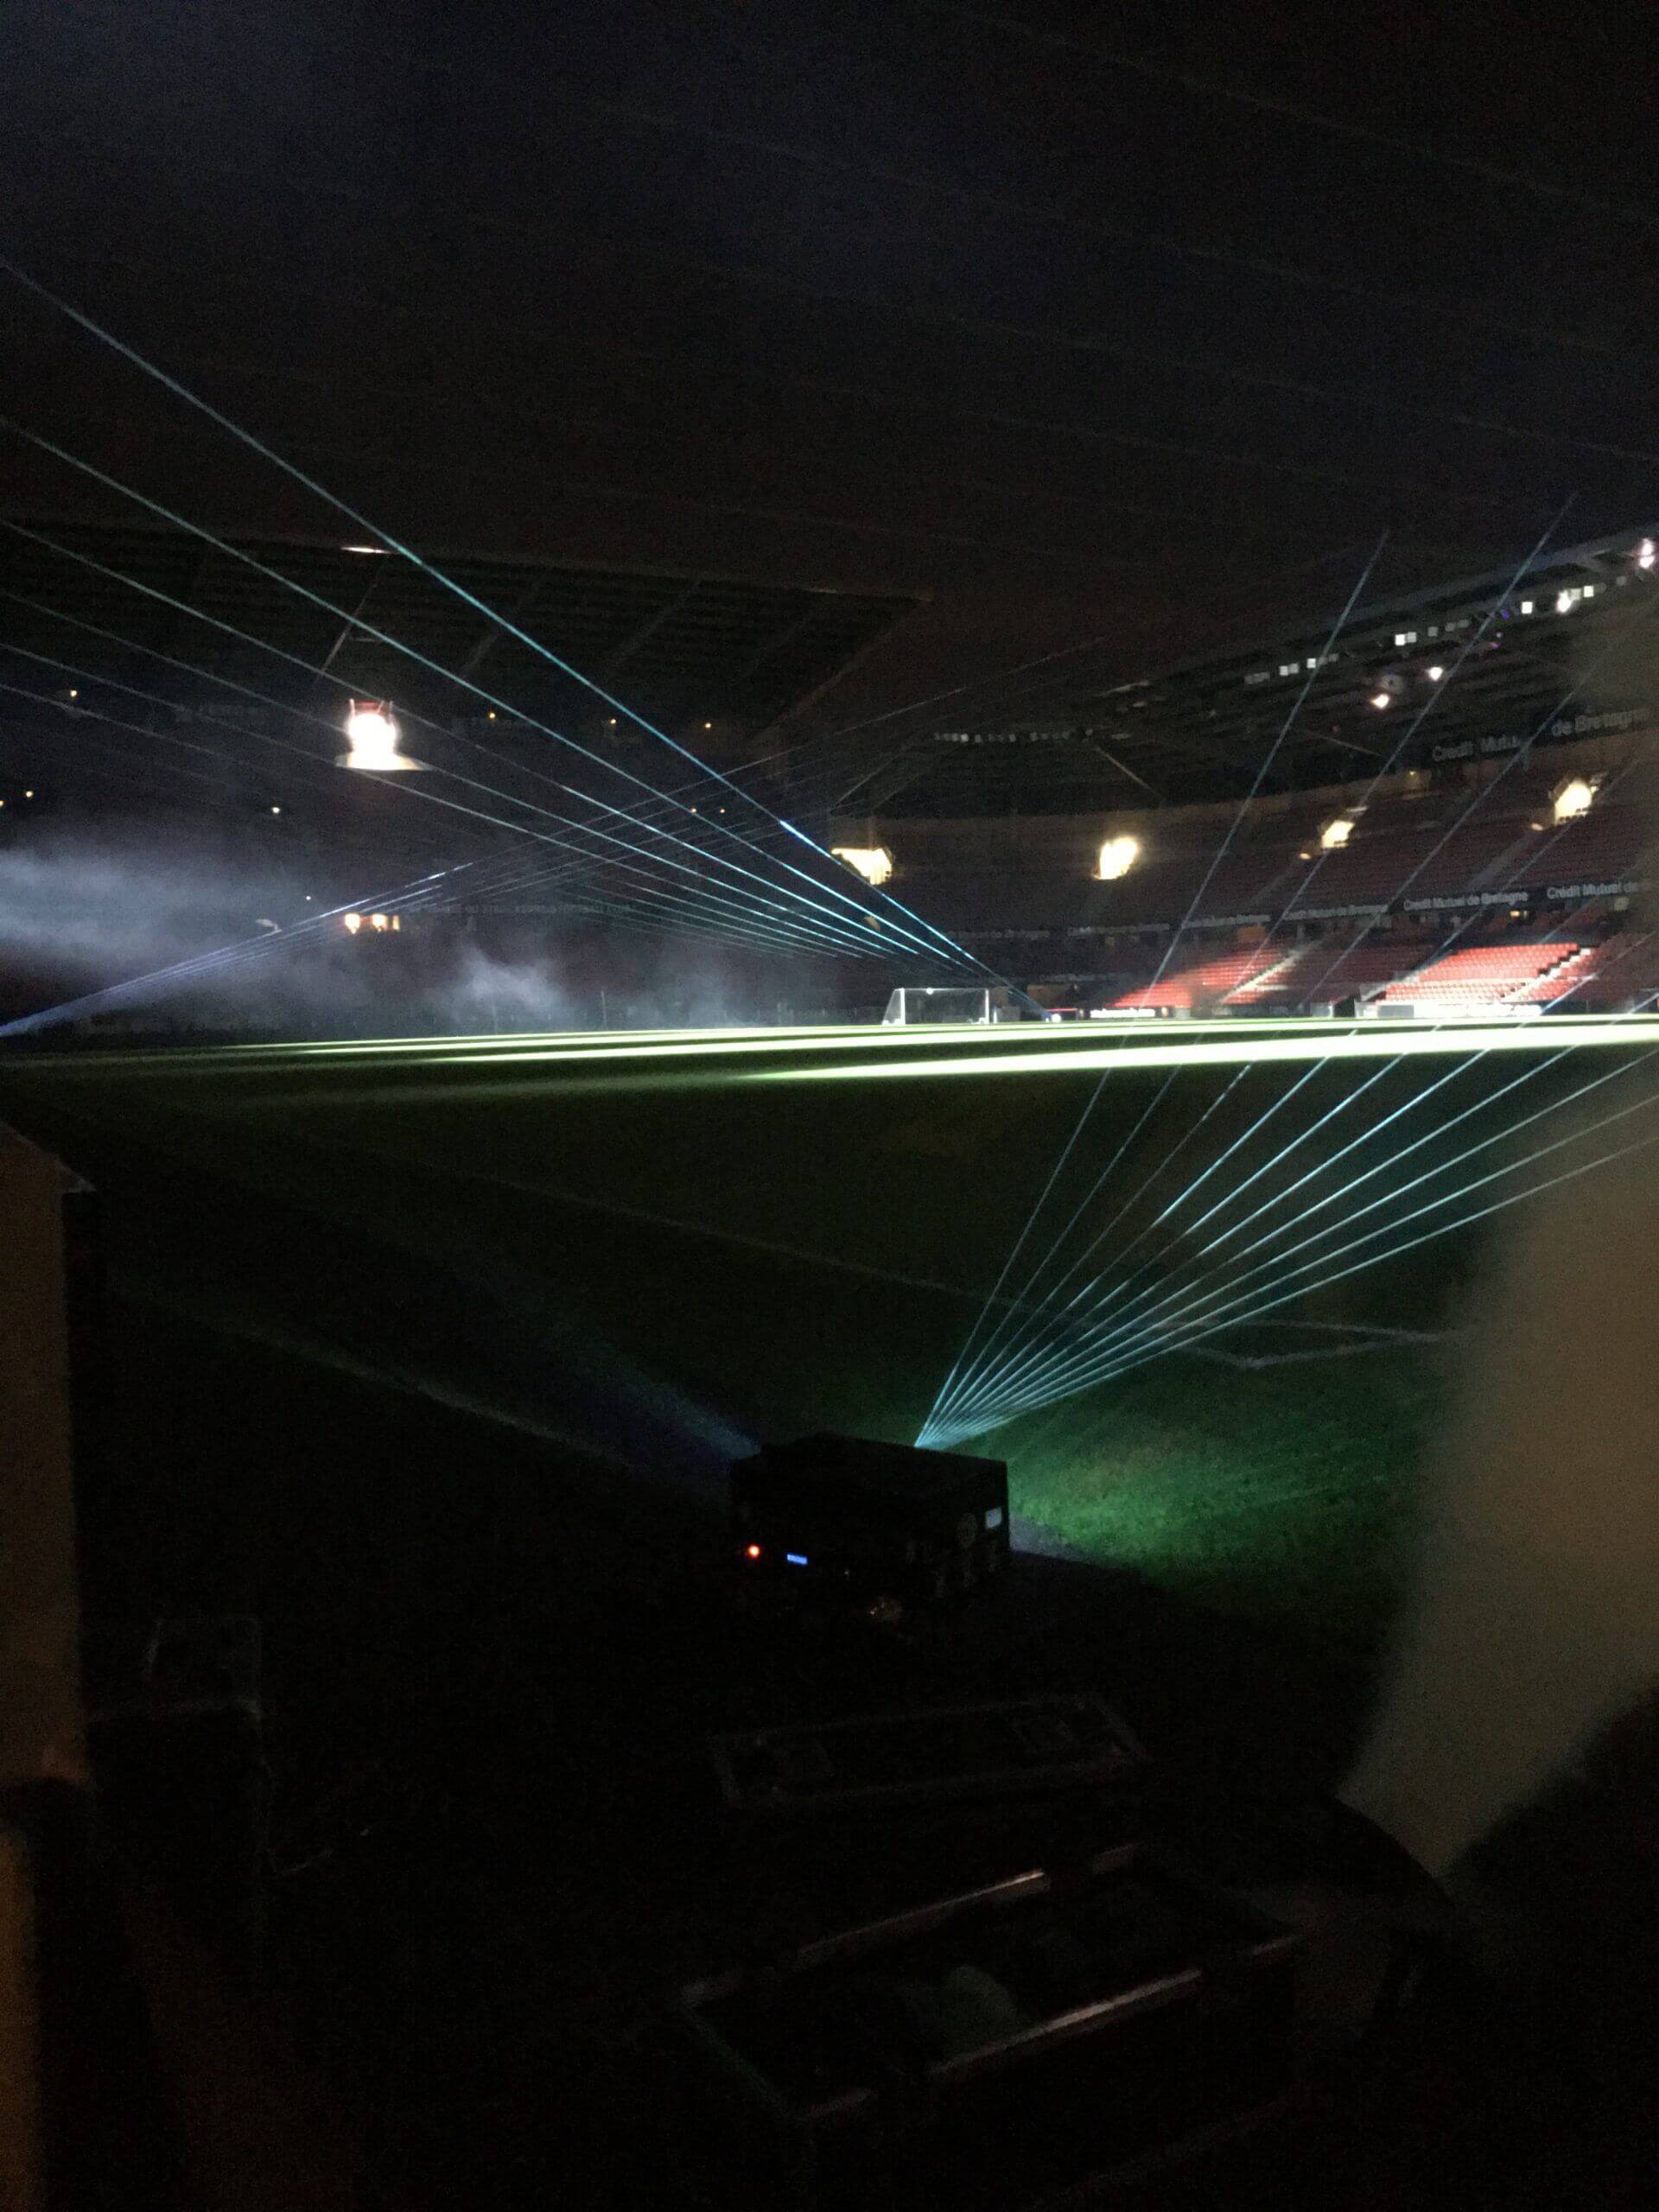 Europe Évènement - Photo of a sports event mapping in a stadium with laser beams projected into the sky